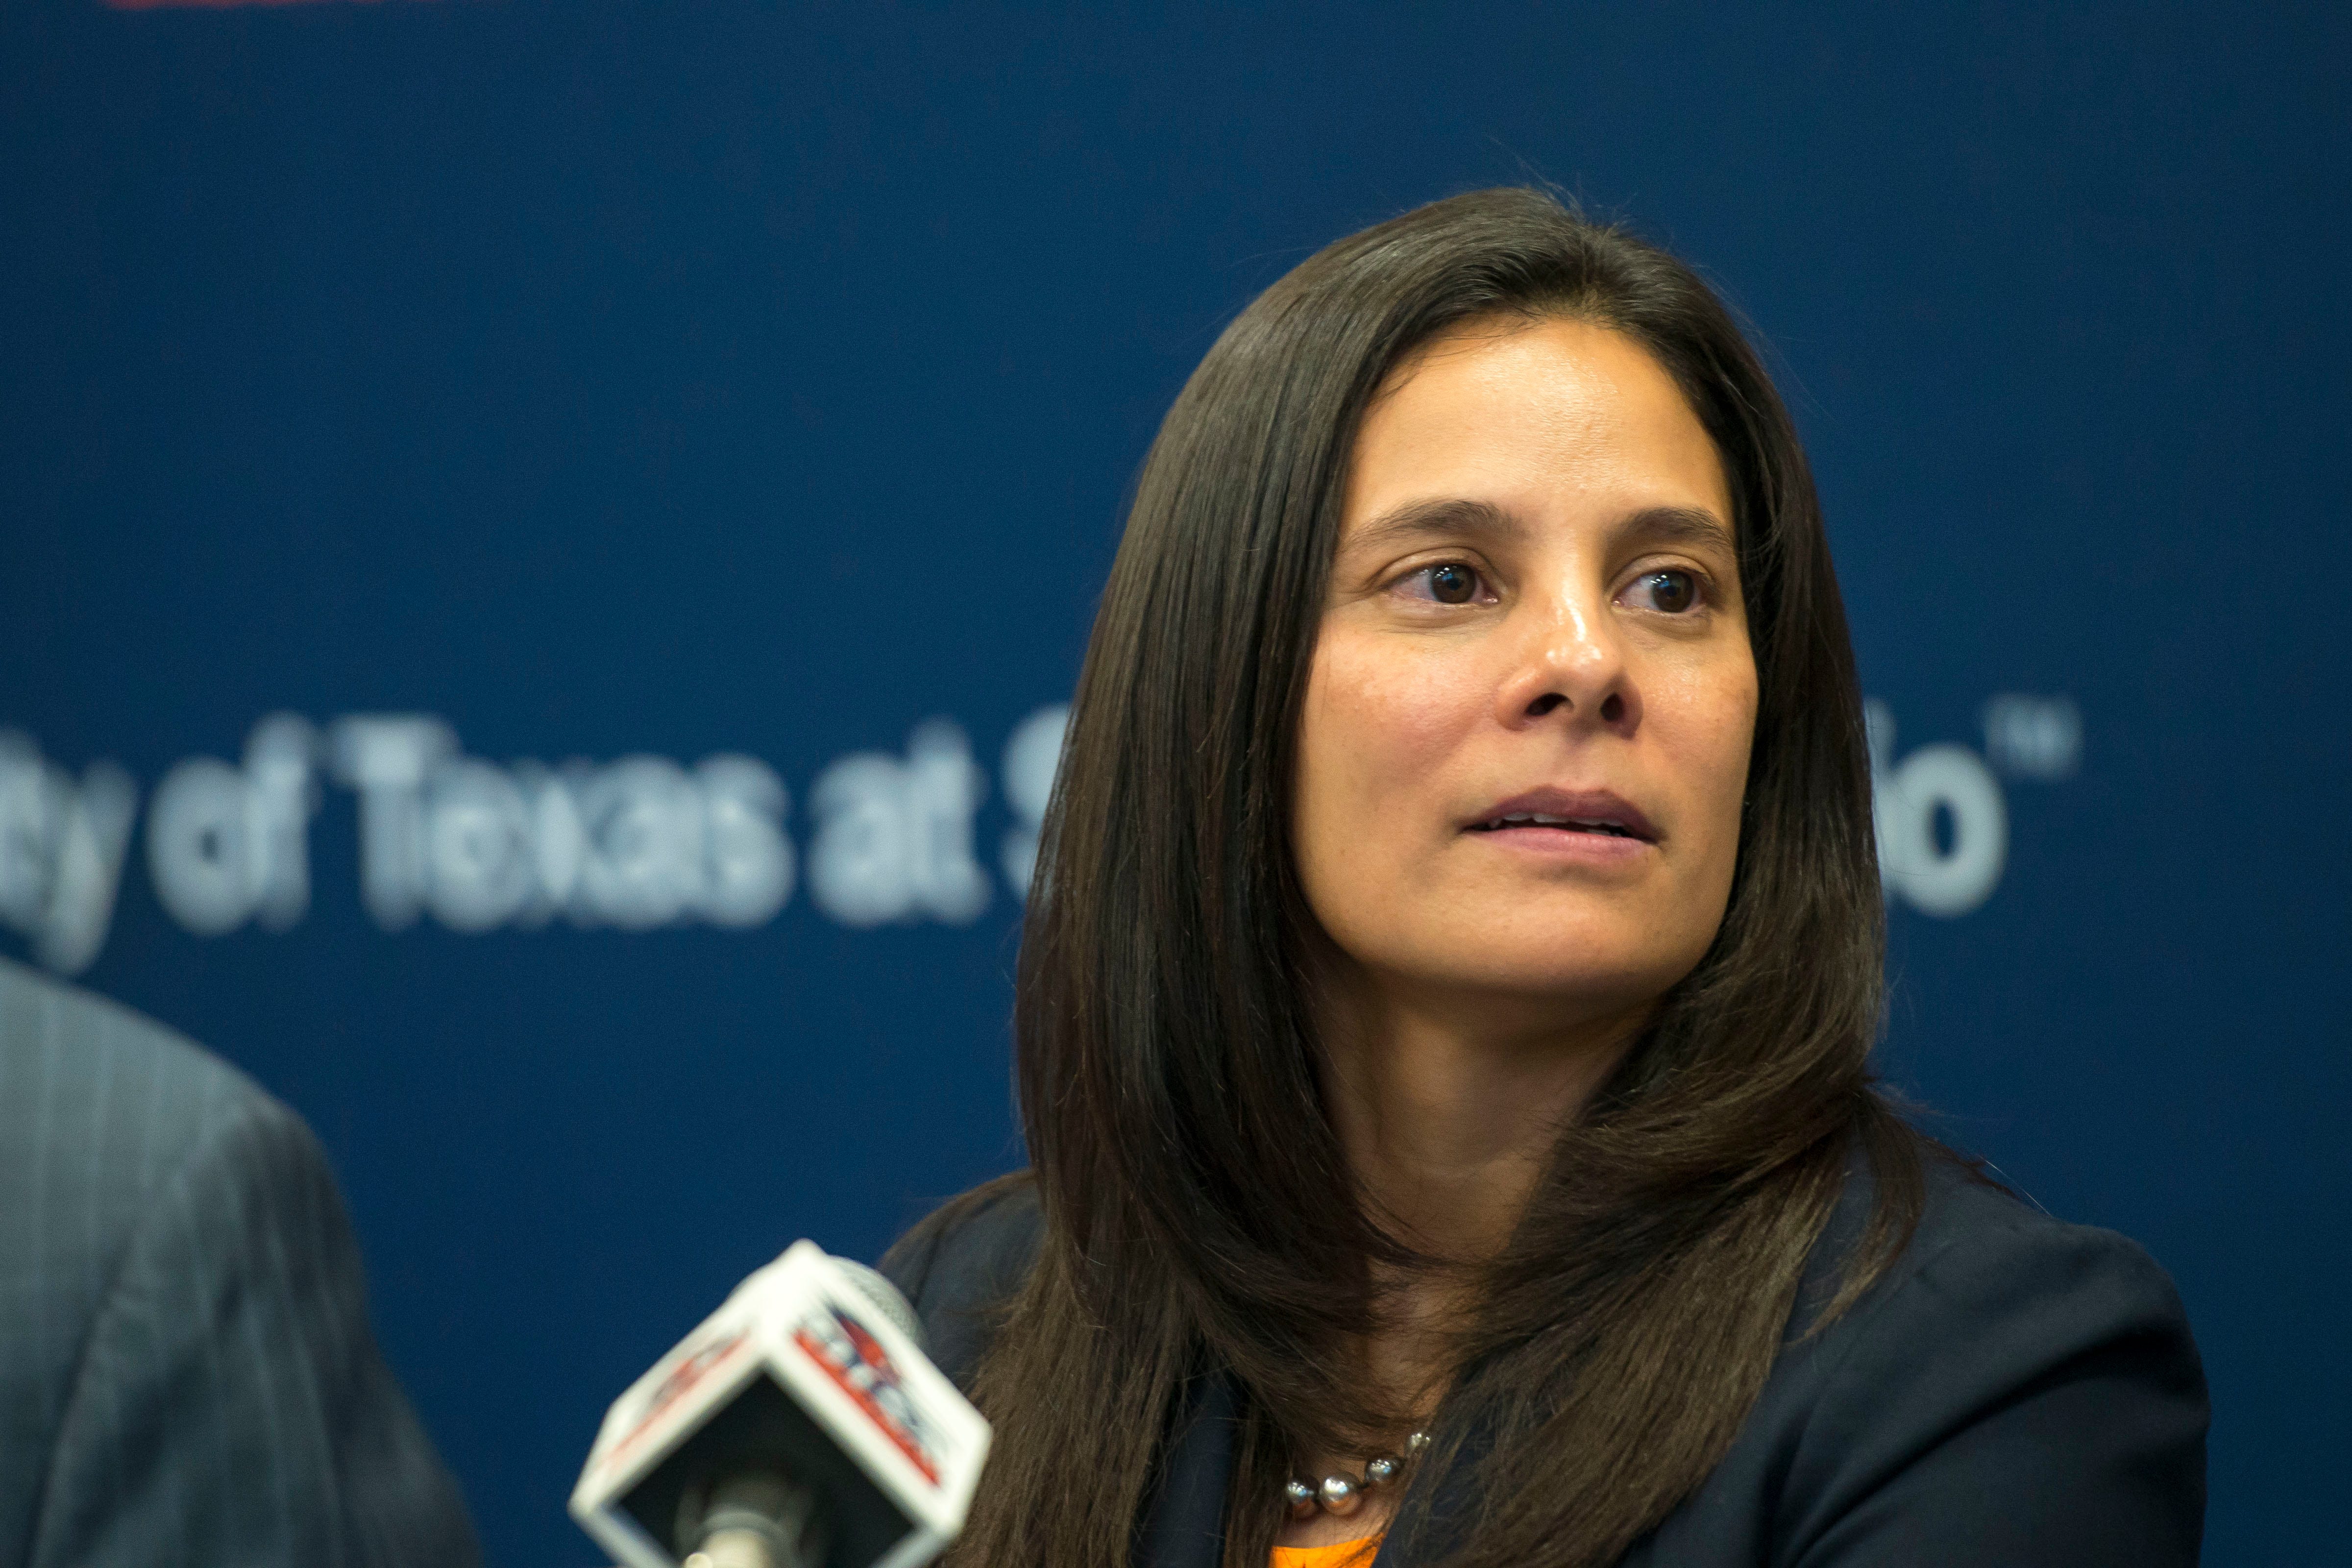 The University of Texas at San Antonio became the first school to adopt the Tracy Rule under athletic director Lisa Campos.